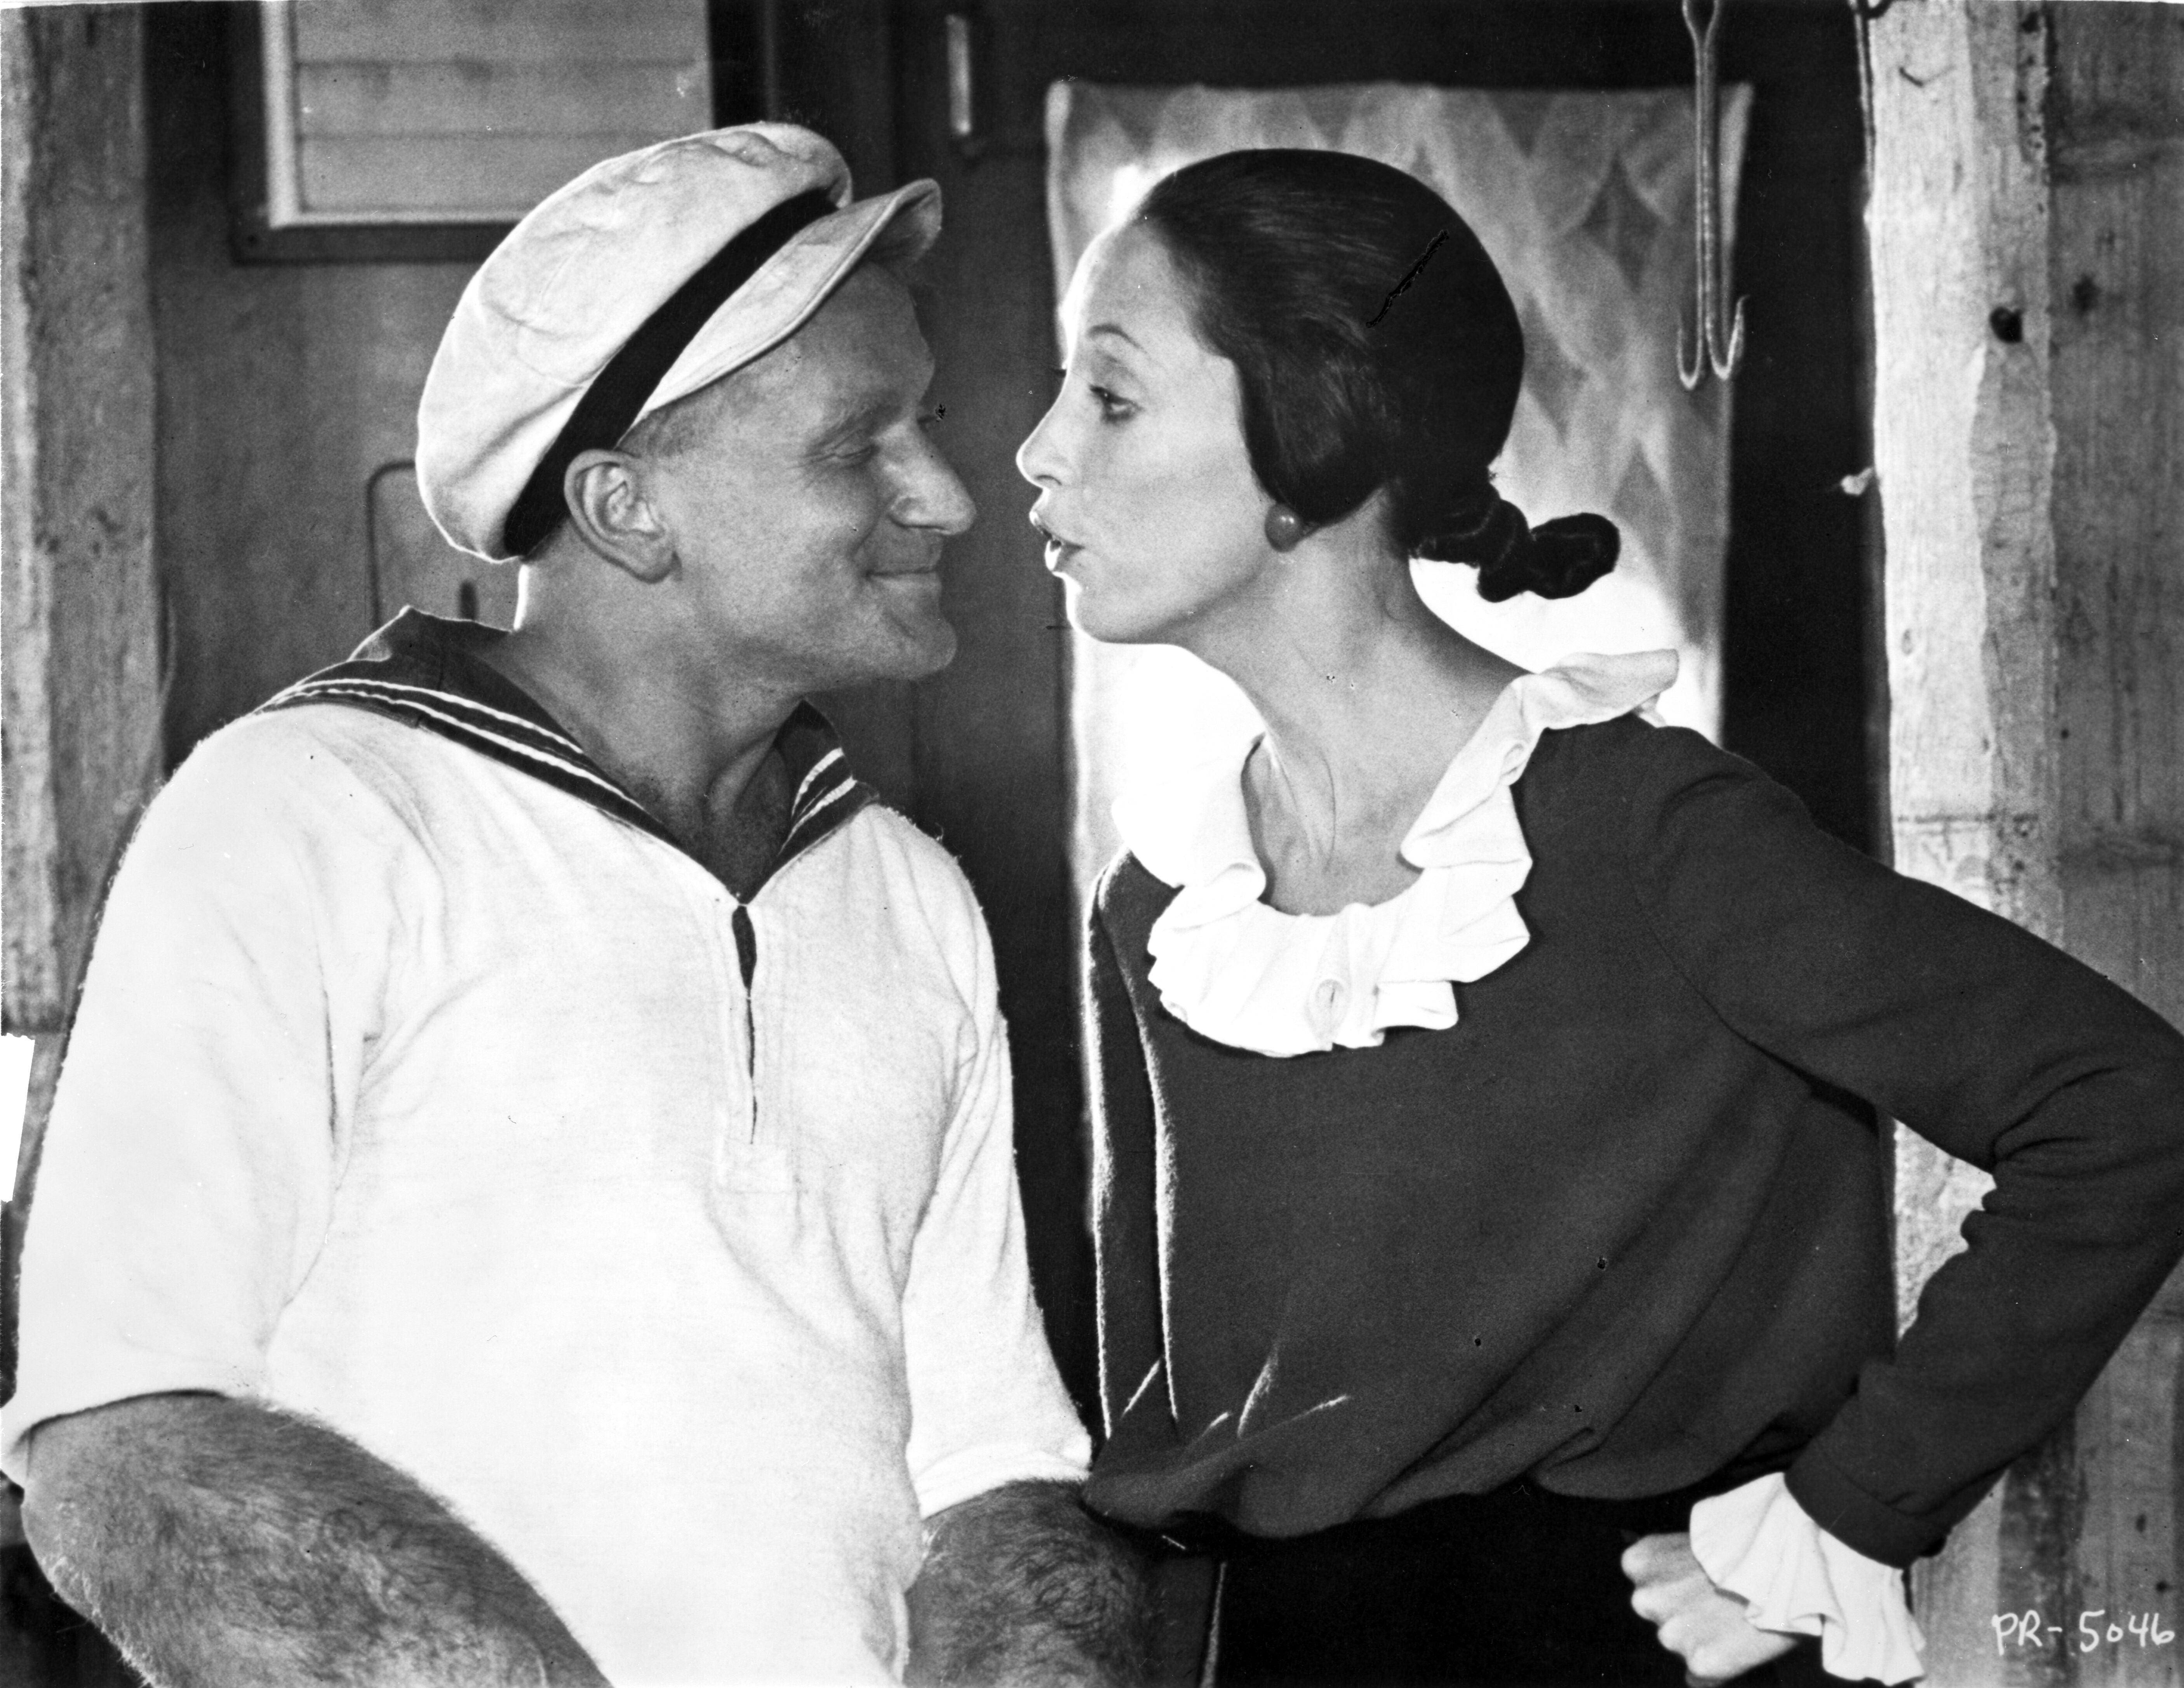 Duvall with Robin Williams in Robert Altman’s ‘Popeye’ (1980)